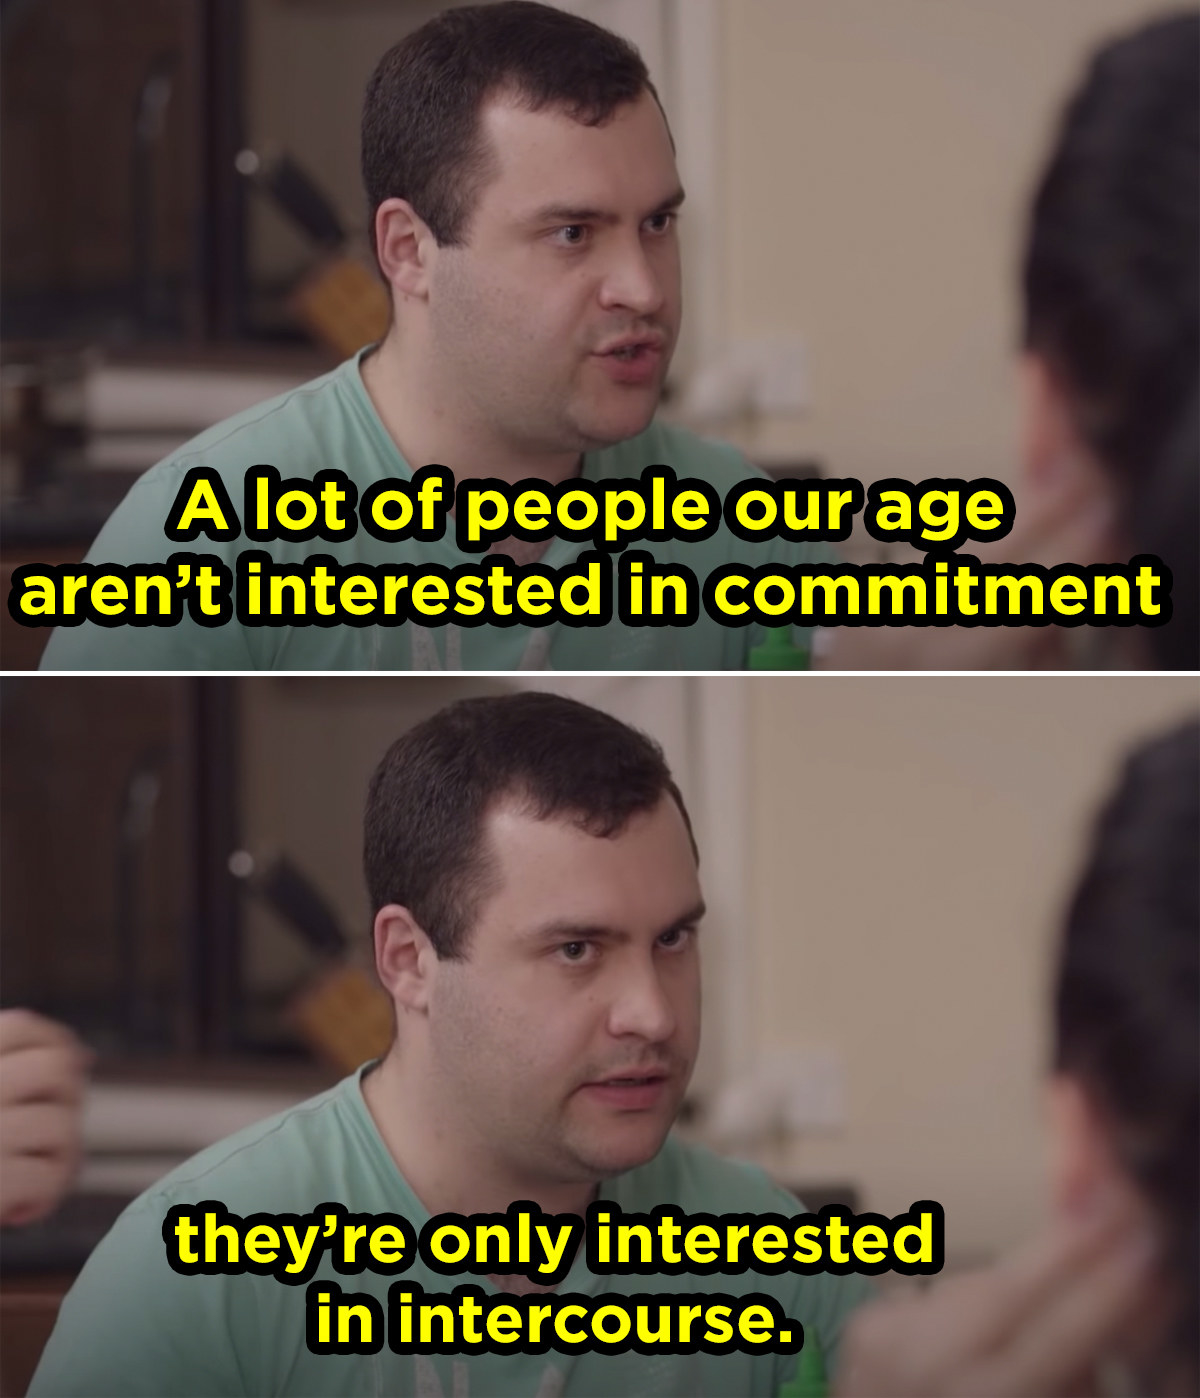 a man with short hair and a t shirt says &quot;a lot of people our age arent interested in commitment they&#x27;re only interested in intercourse&quot;